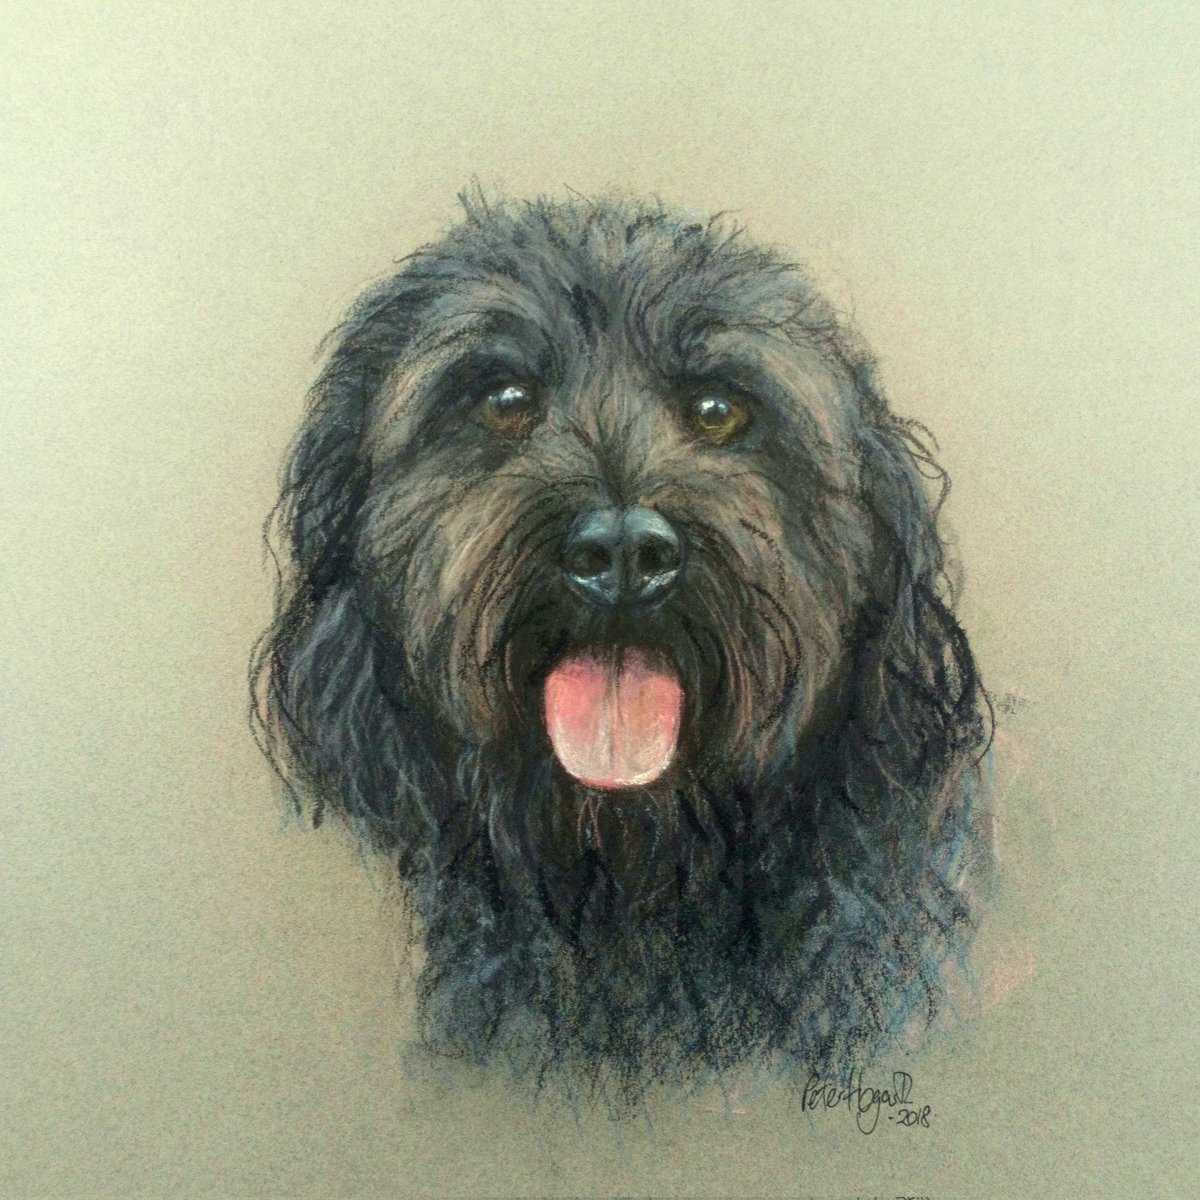 A happy face to bring you Sunday greetings! I was commissioned to portray this delightful dog in 2018. -soft pastels on Canson Mi Teintes paper 😊